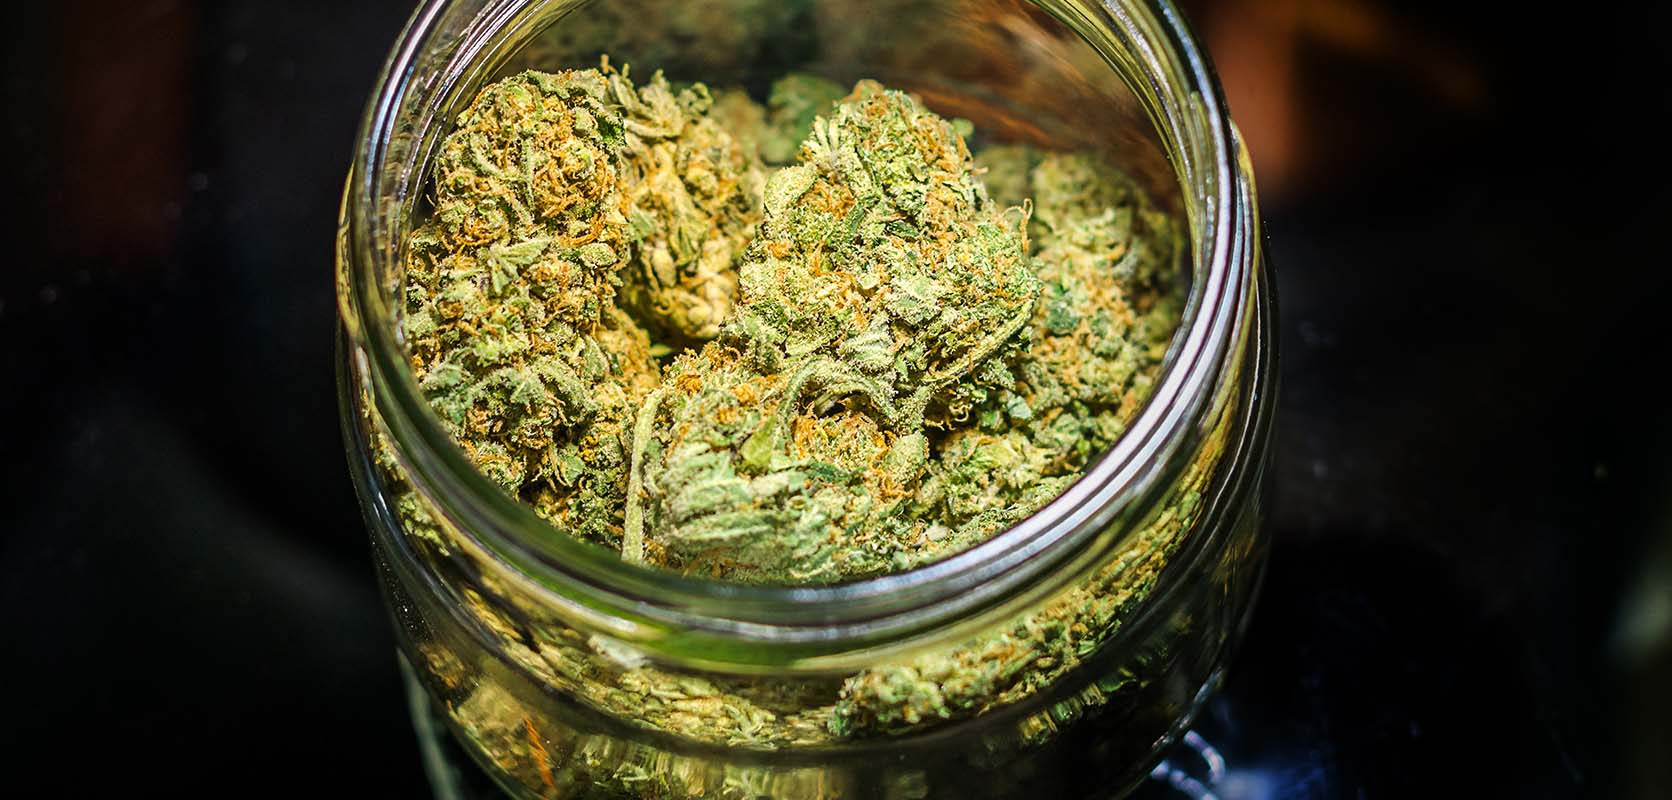 Photo of cannabis nugs in a jar. purchase weed online at low price bud online dispensary for cheap weed.